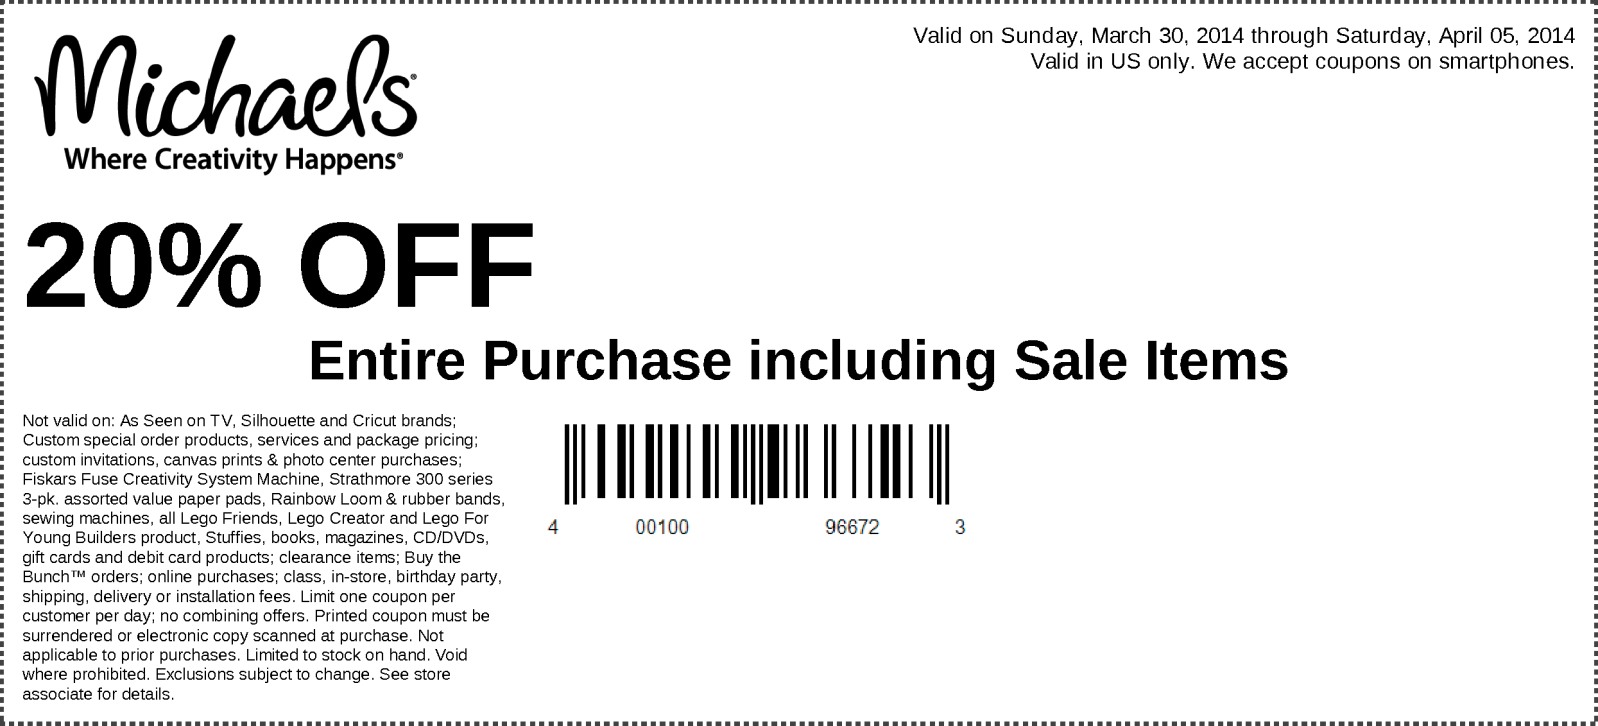 Michaels - 20% Off Your Entire In-Store Purchase - Exp. 04/05/14 - Free Printable Michaels Coupons